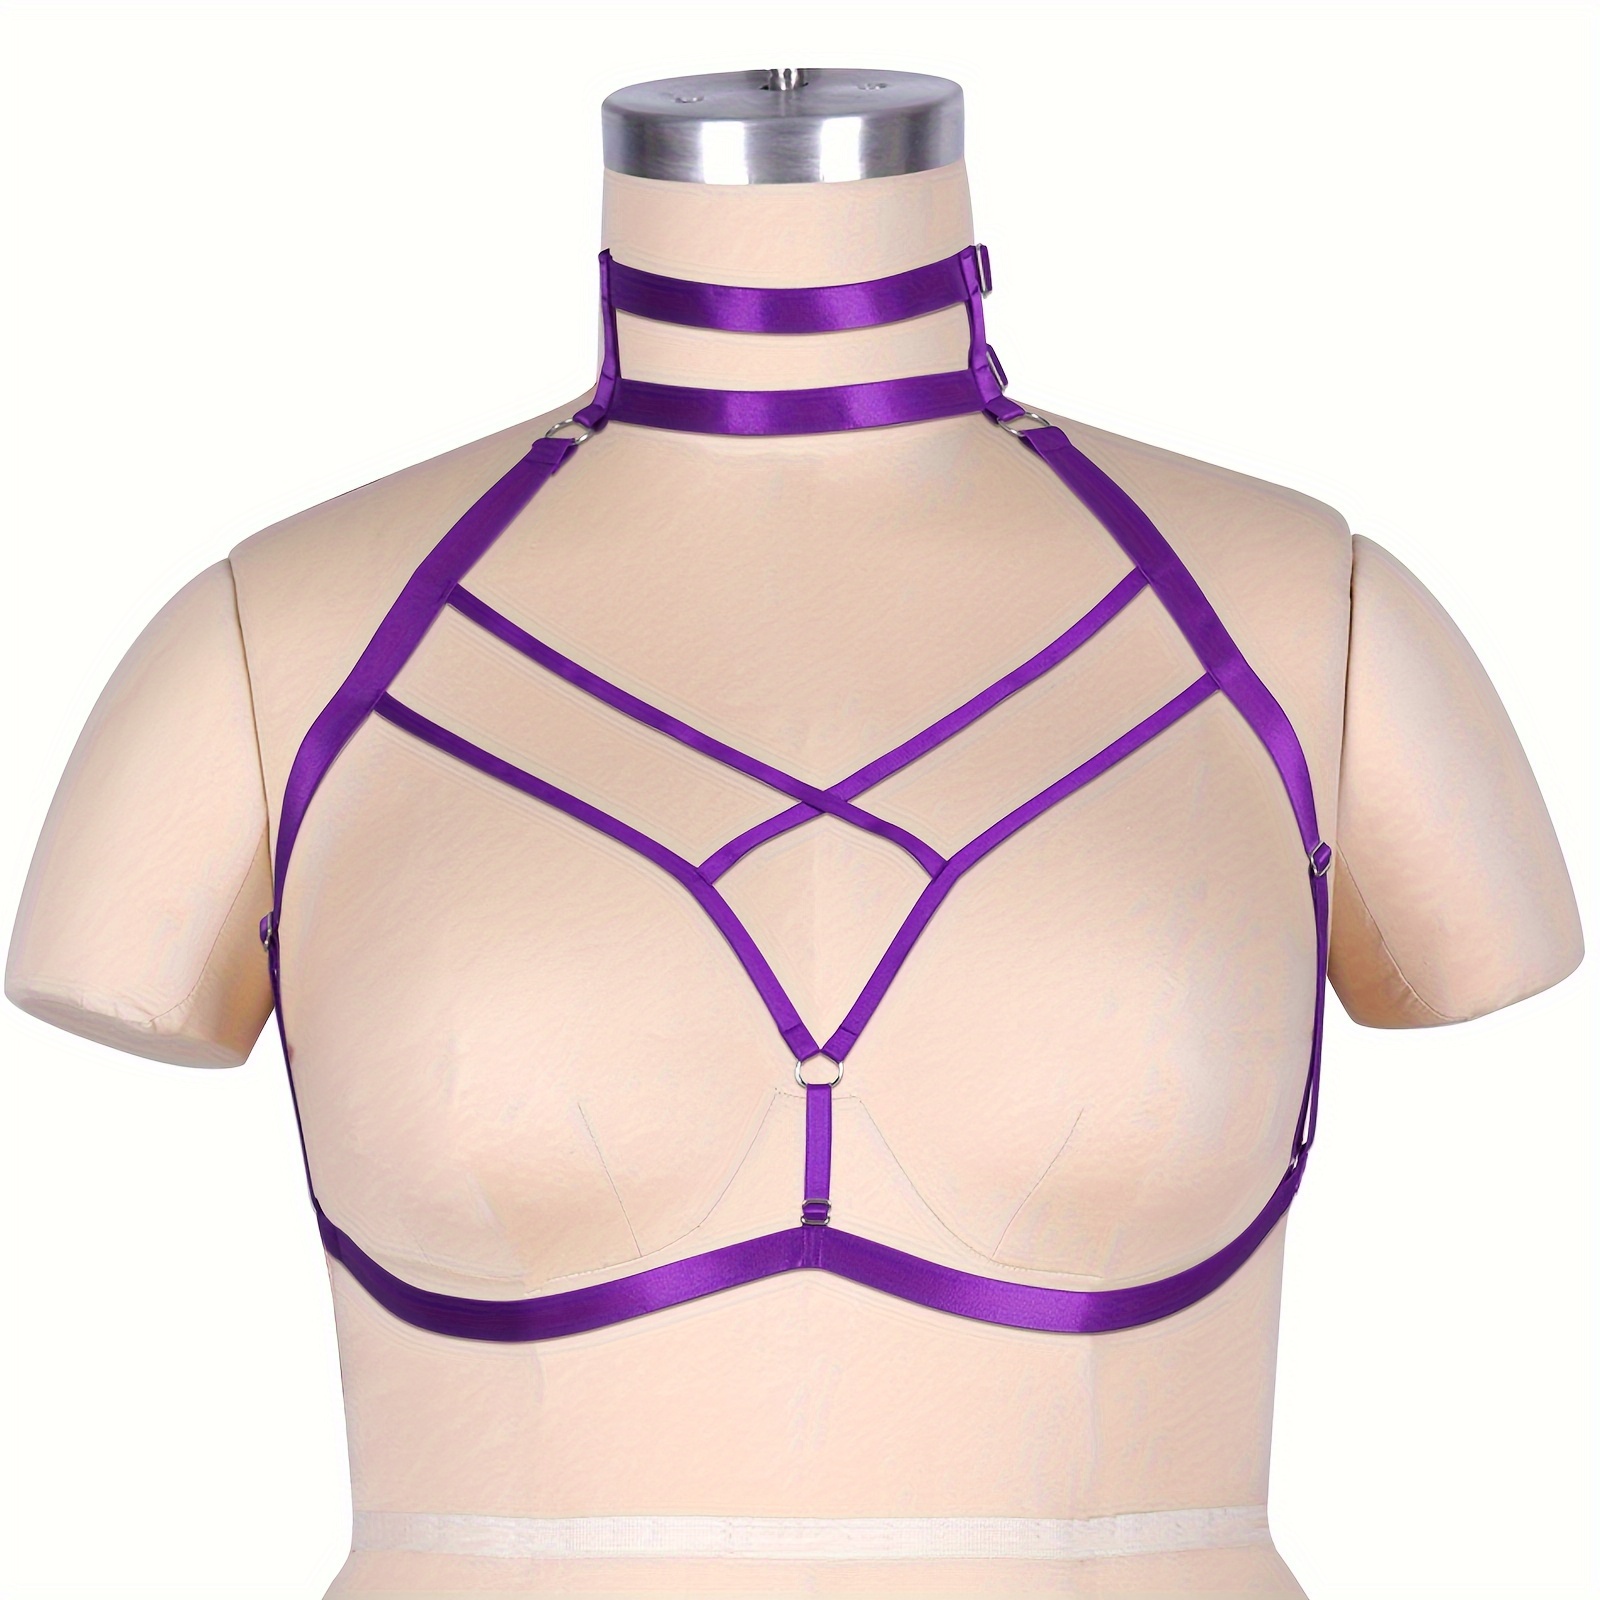 Punk Green PU Leather Chest Bra Cage Suspenders Neck Waist Harness